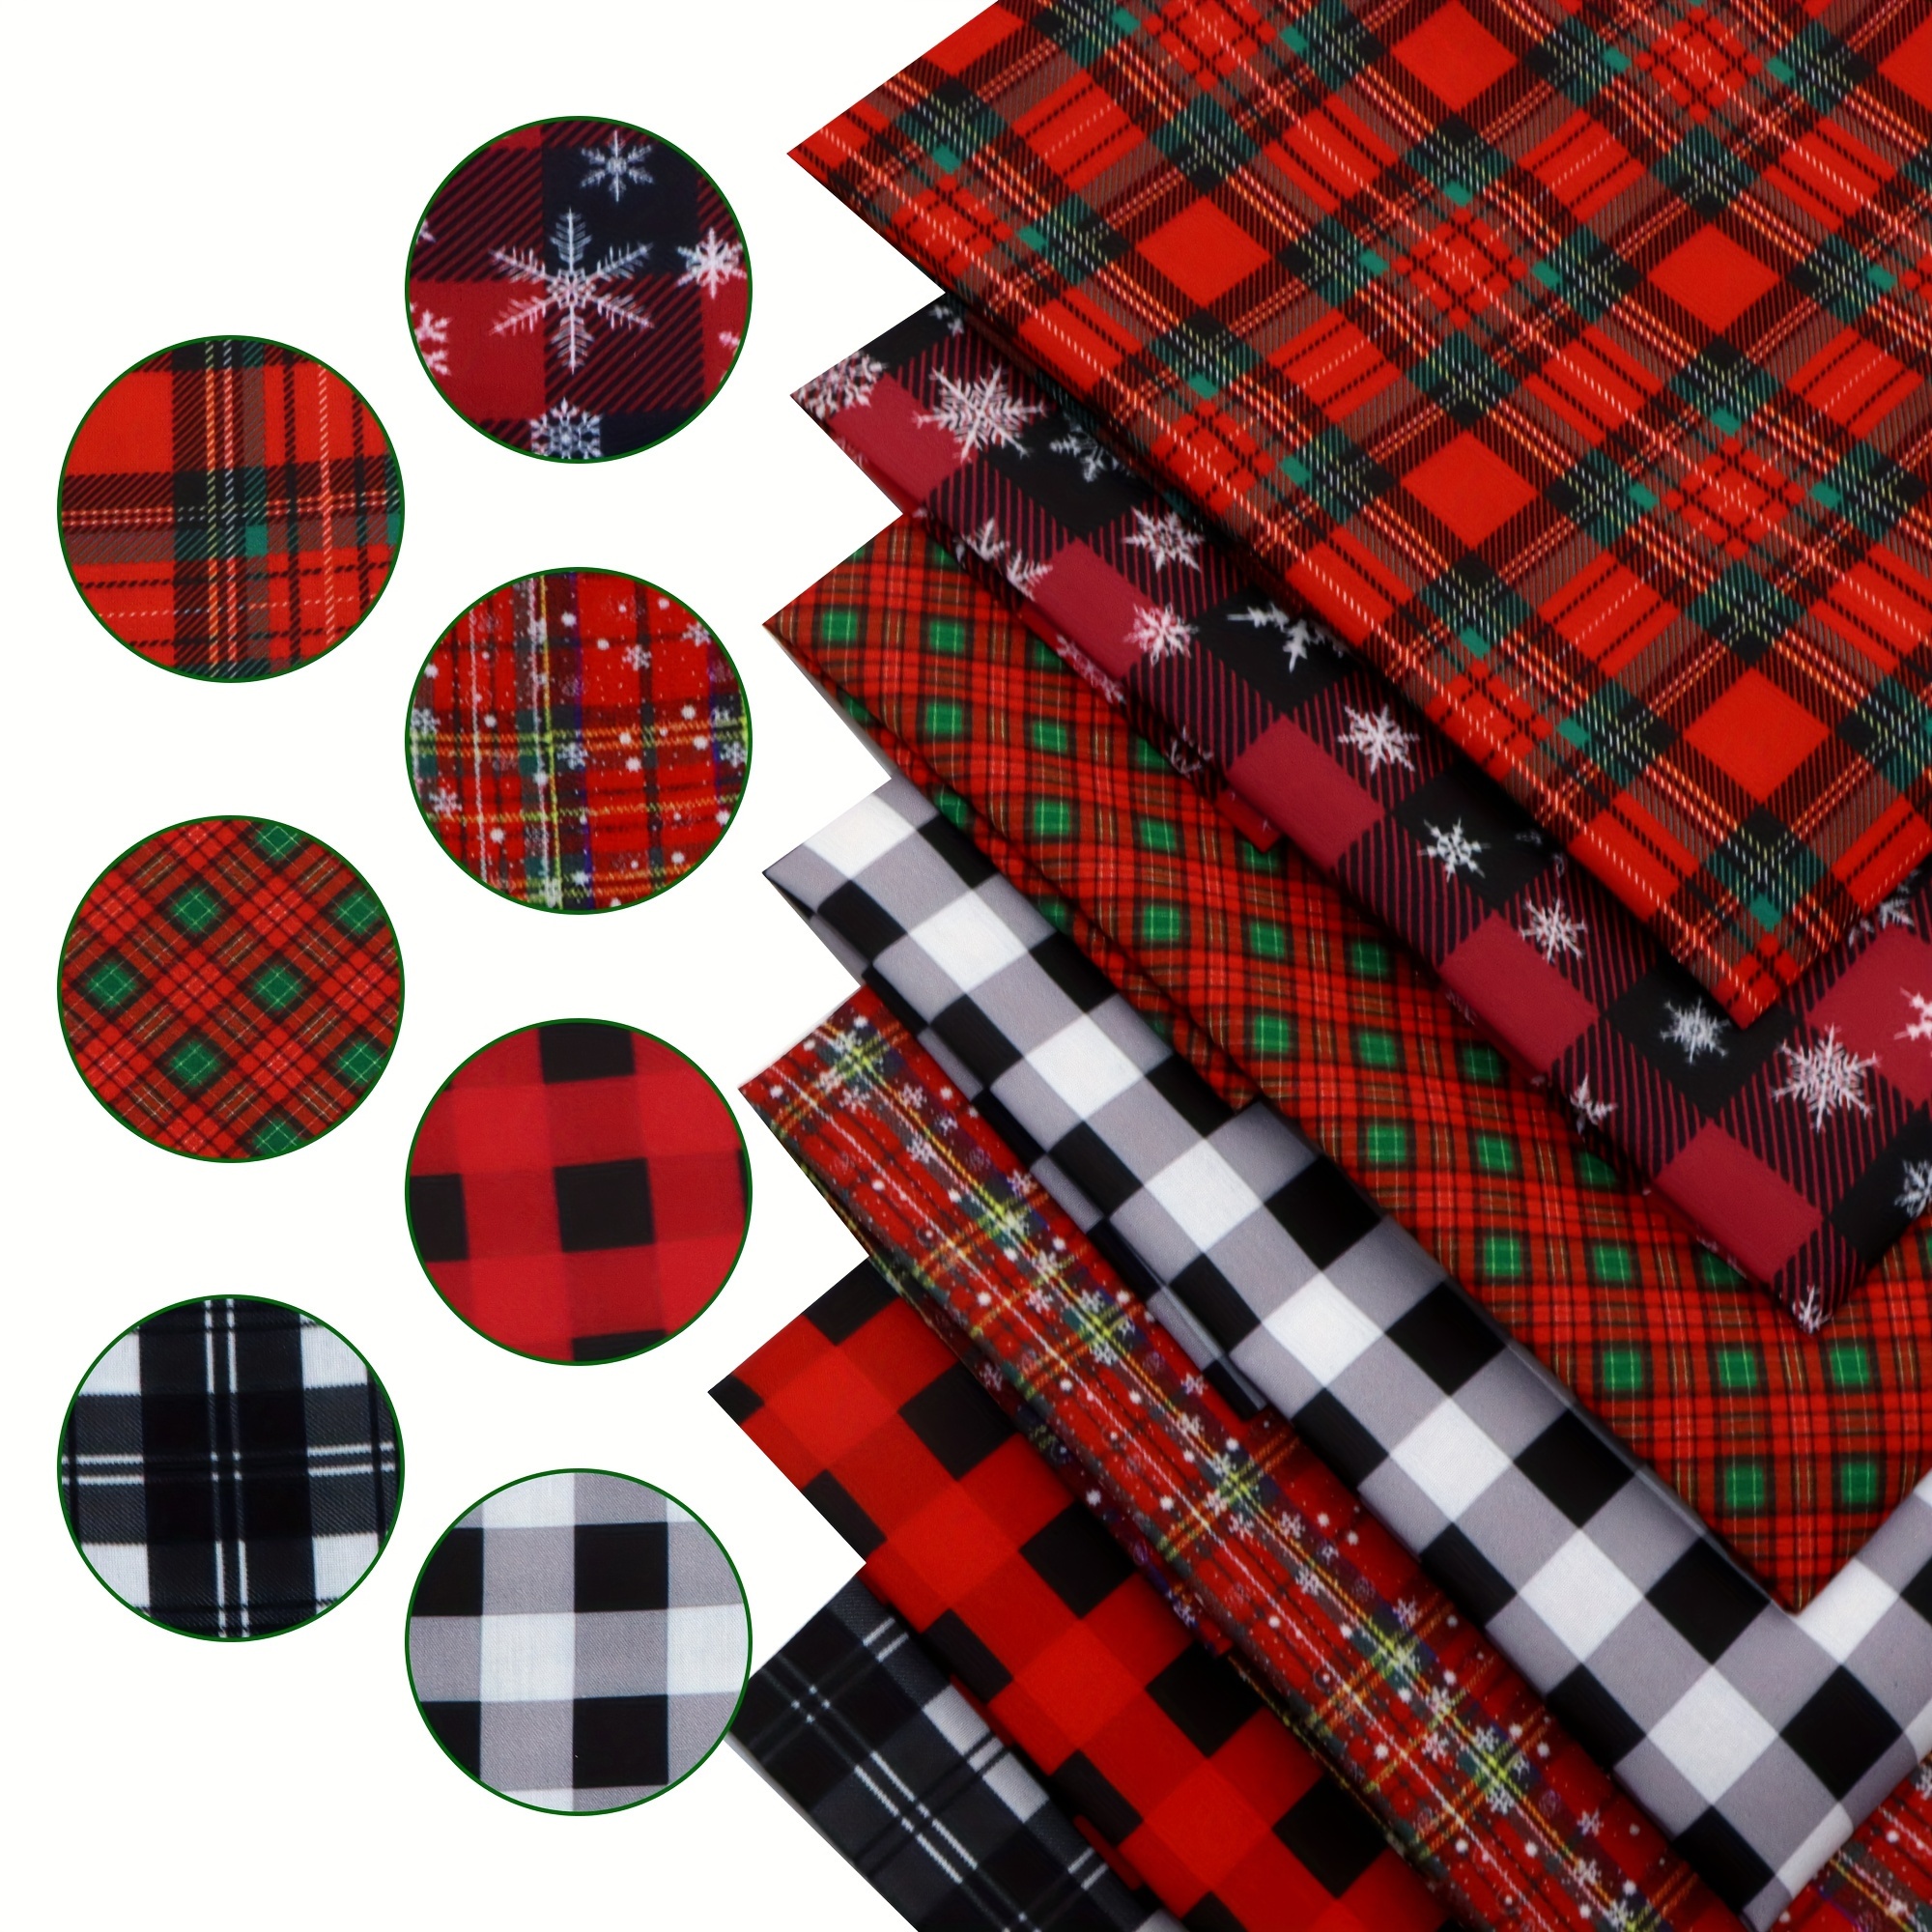 

7pcs Plaid Checkered Fat Quarter Fabric Bundles, 9.84x7.87inch, 95% Polyester 5% Cotton, Hand Wash Only, Pre-cut Squares For Sewing, Quilting, Crafting - Christmas Holiday Patchwork Scraps (108gsm)